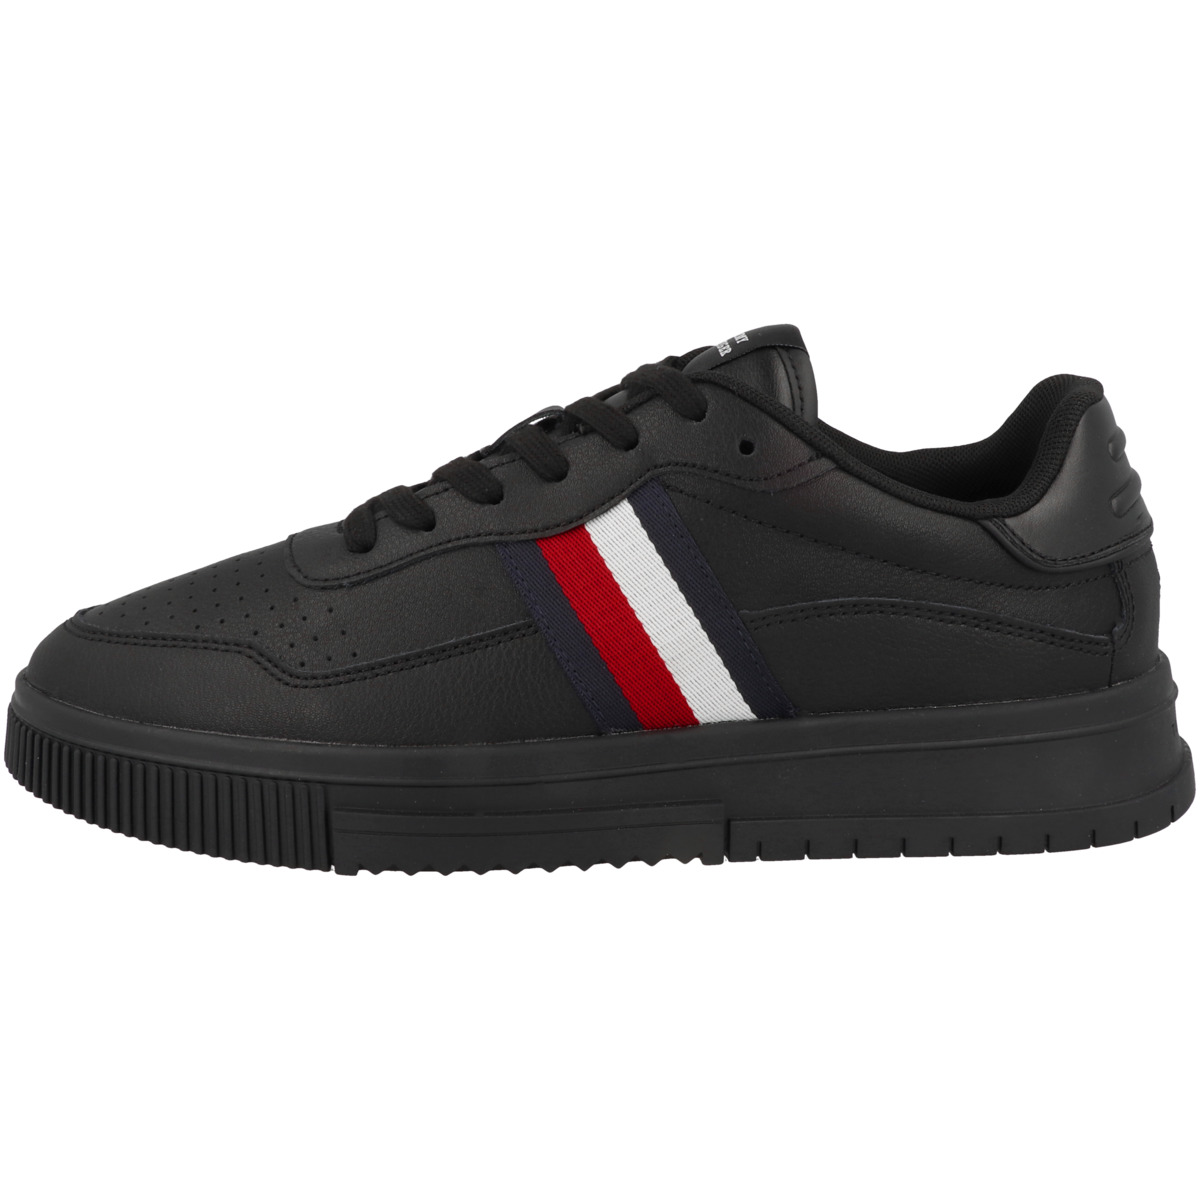 Tommy Hilfiger Supercup Leather Stripes Sneaker